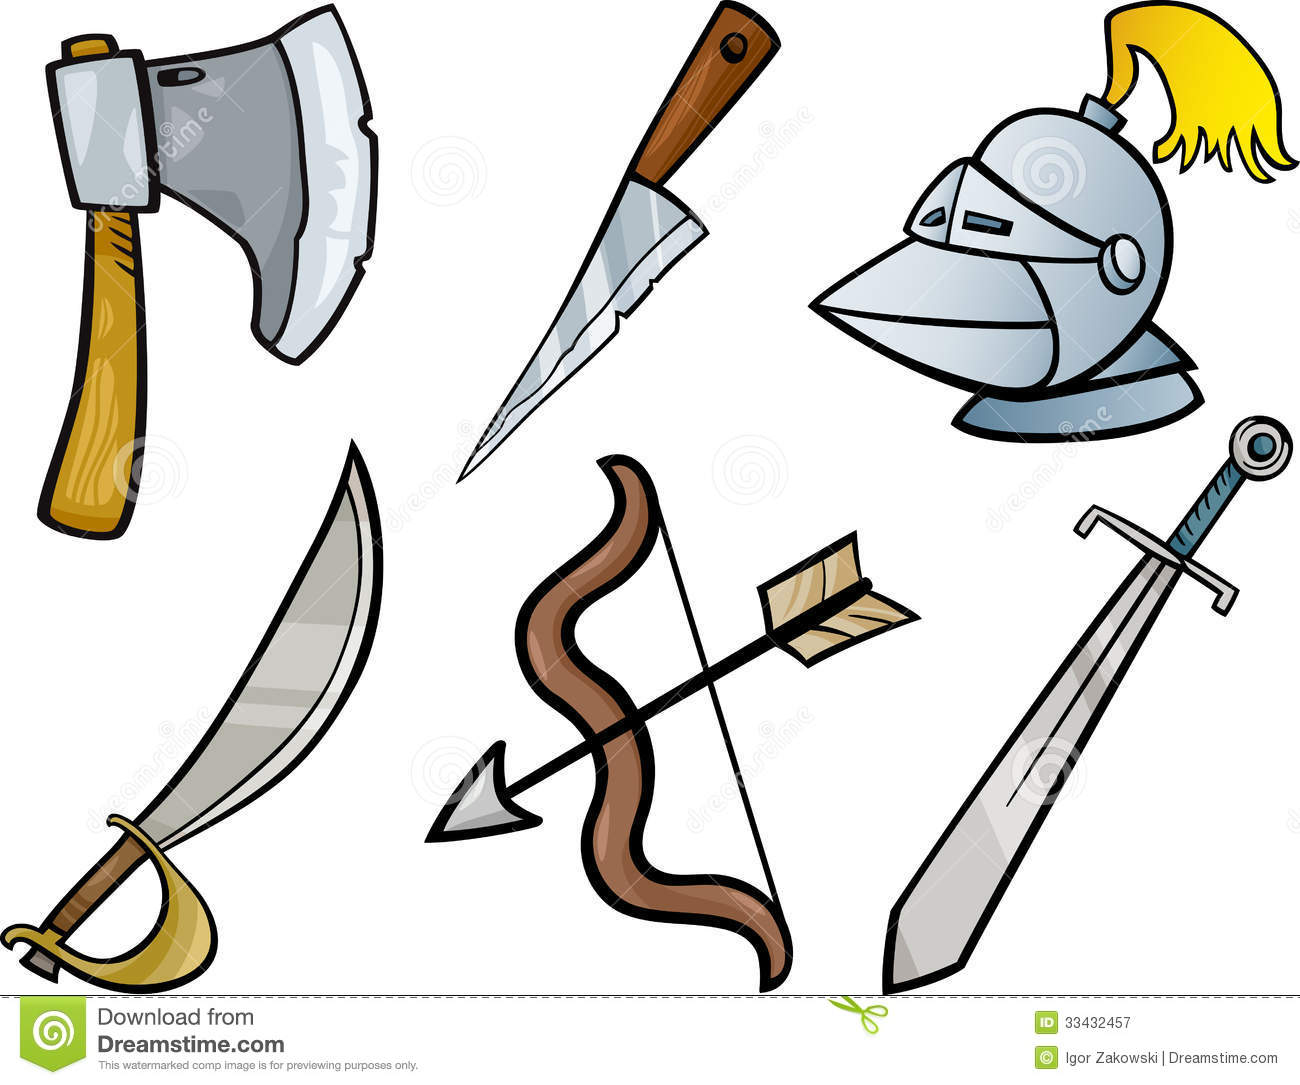 Weapon clipart #11, Download drawings